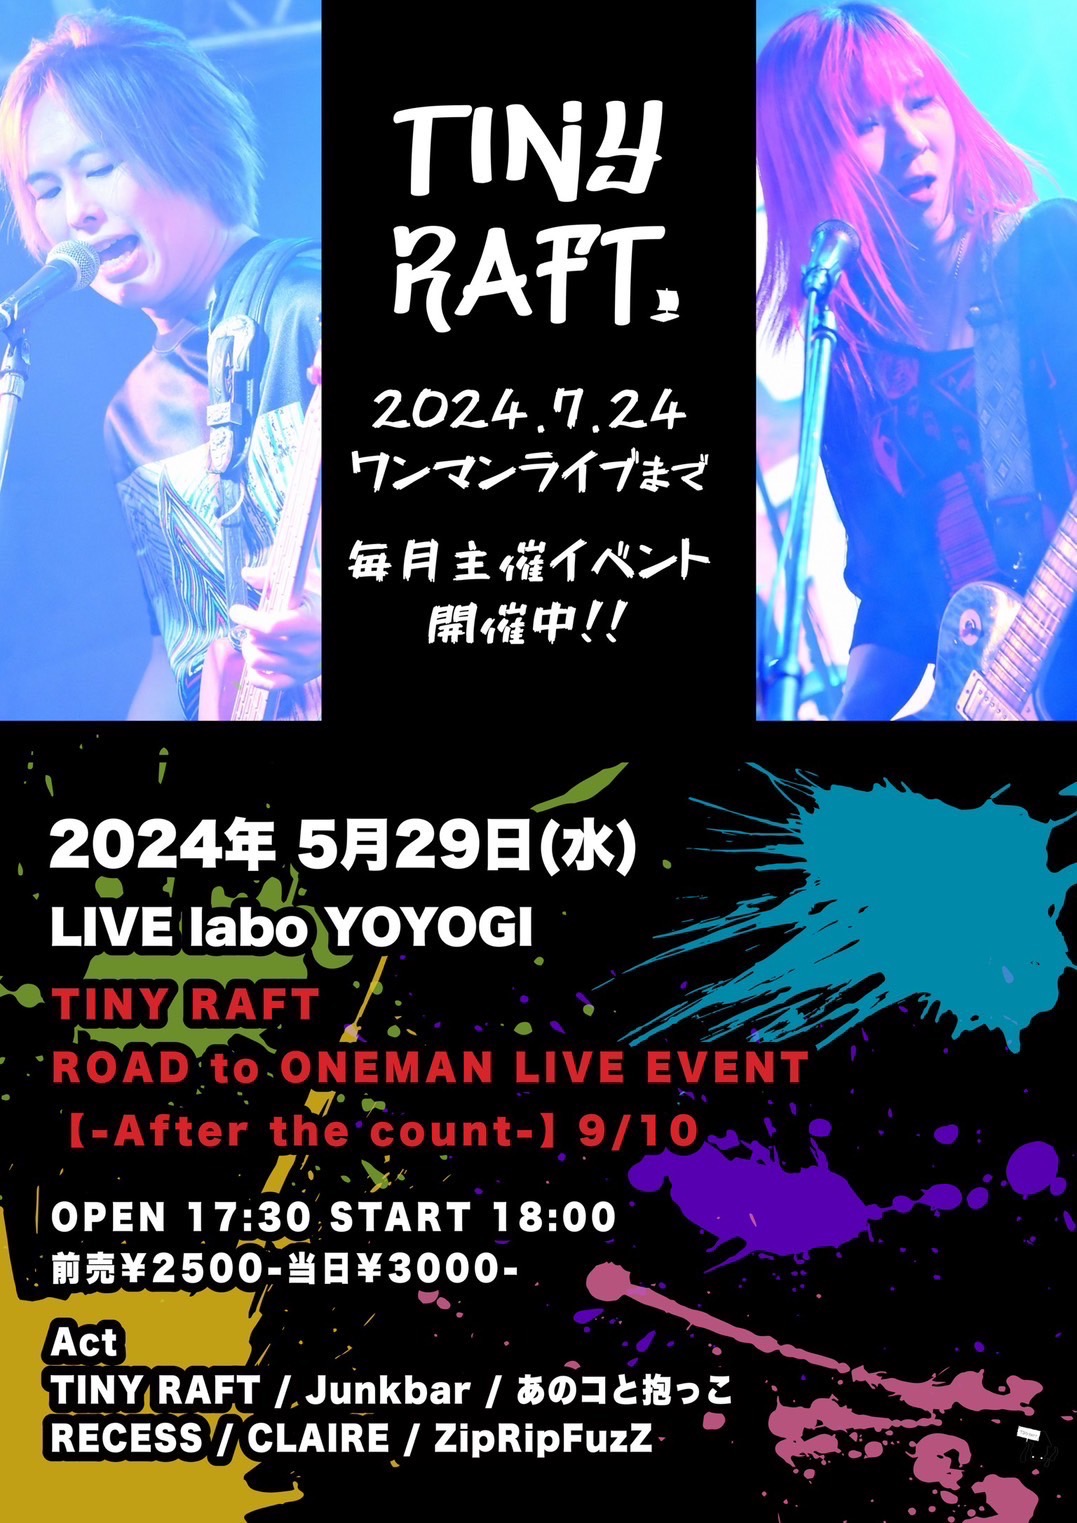 TINY RAFT ROAD TO ONEMAN LIVE EVENT
【After the count】9/10